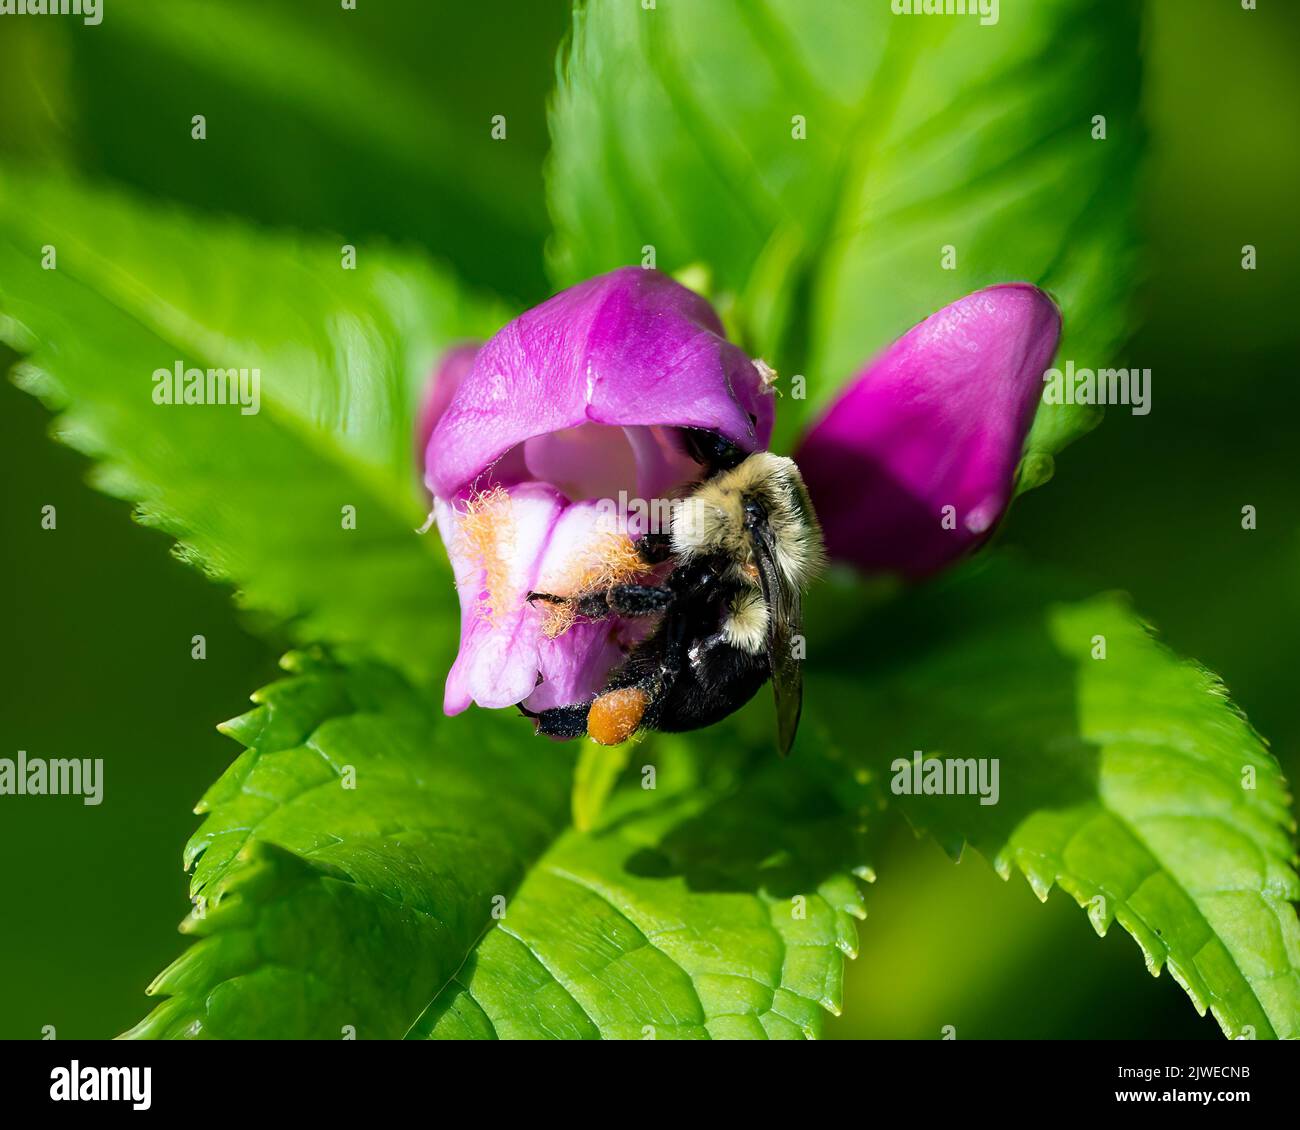 A bumblebee feeding on and pollinating pink turtlehead flowers in a garden in Speculator, NY Stock Photo